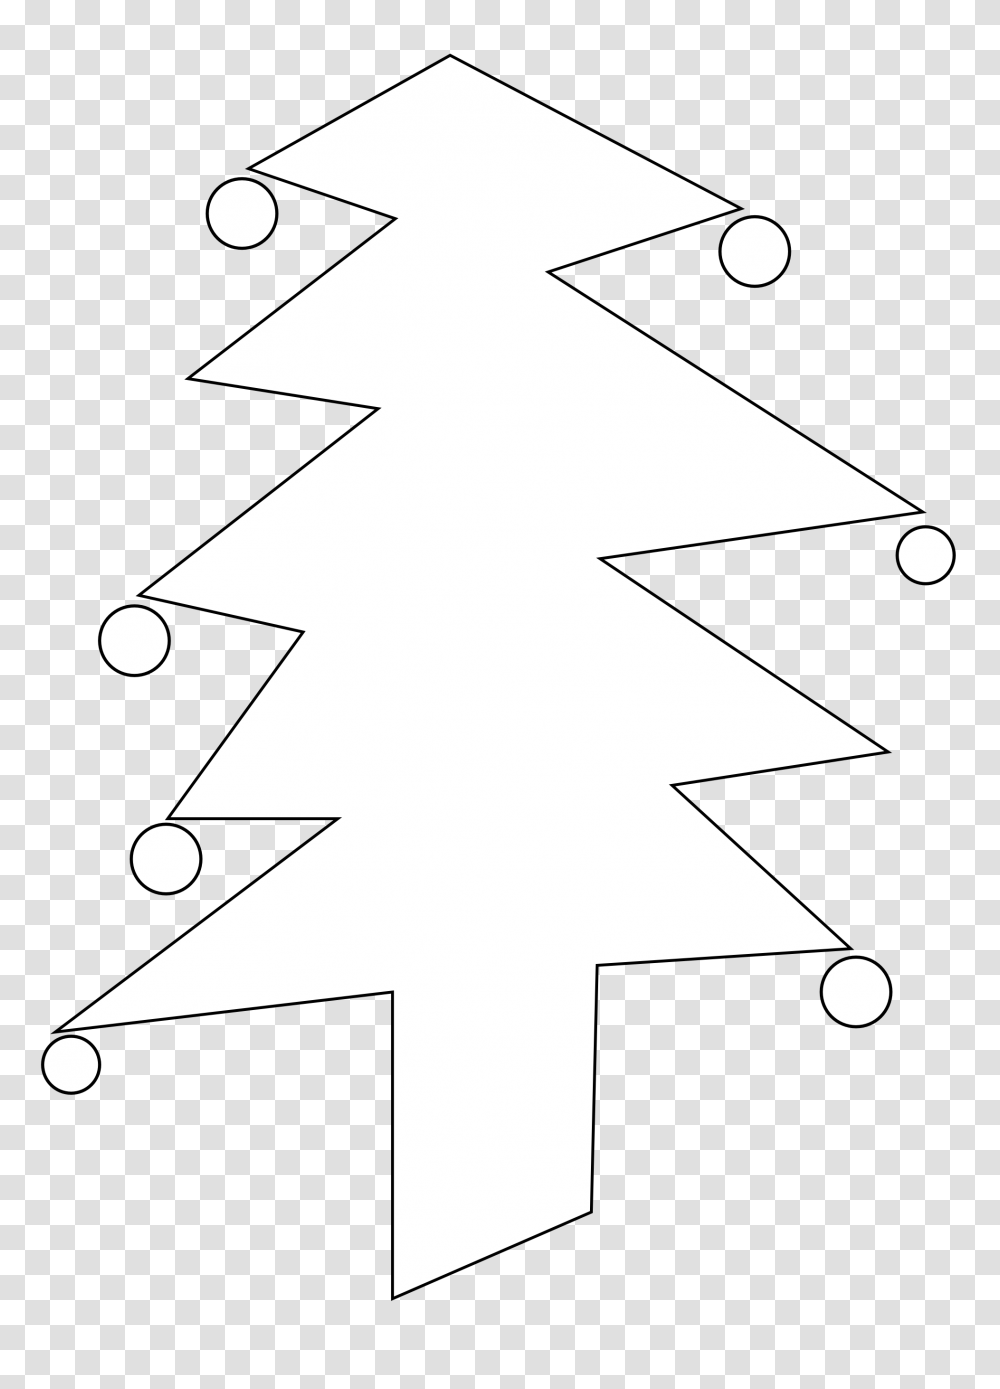 Download Christmas Tree Black And White Clip Christmas, Snowflake, Ornament, Star Symbol, Pattern Transparent Png